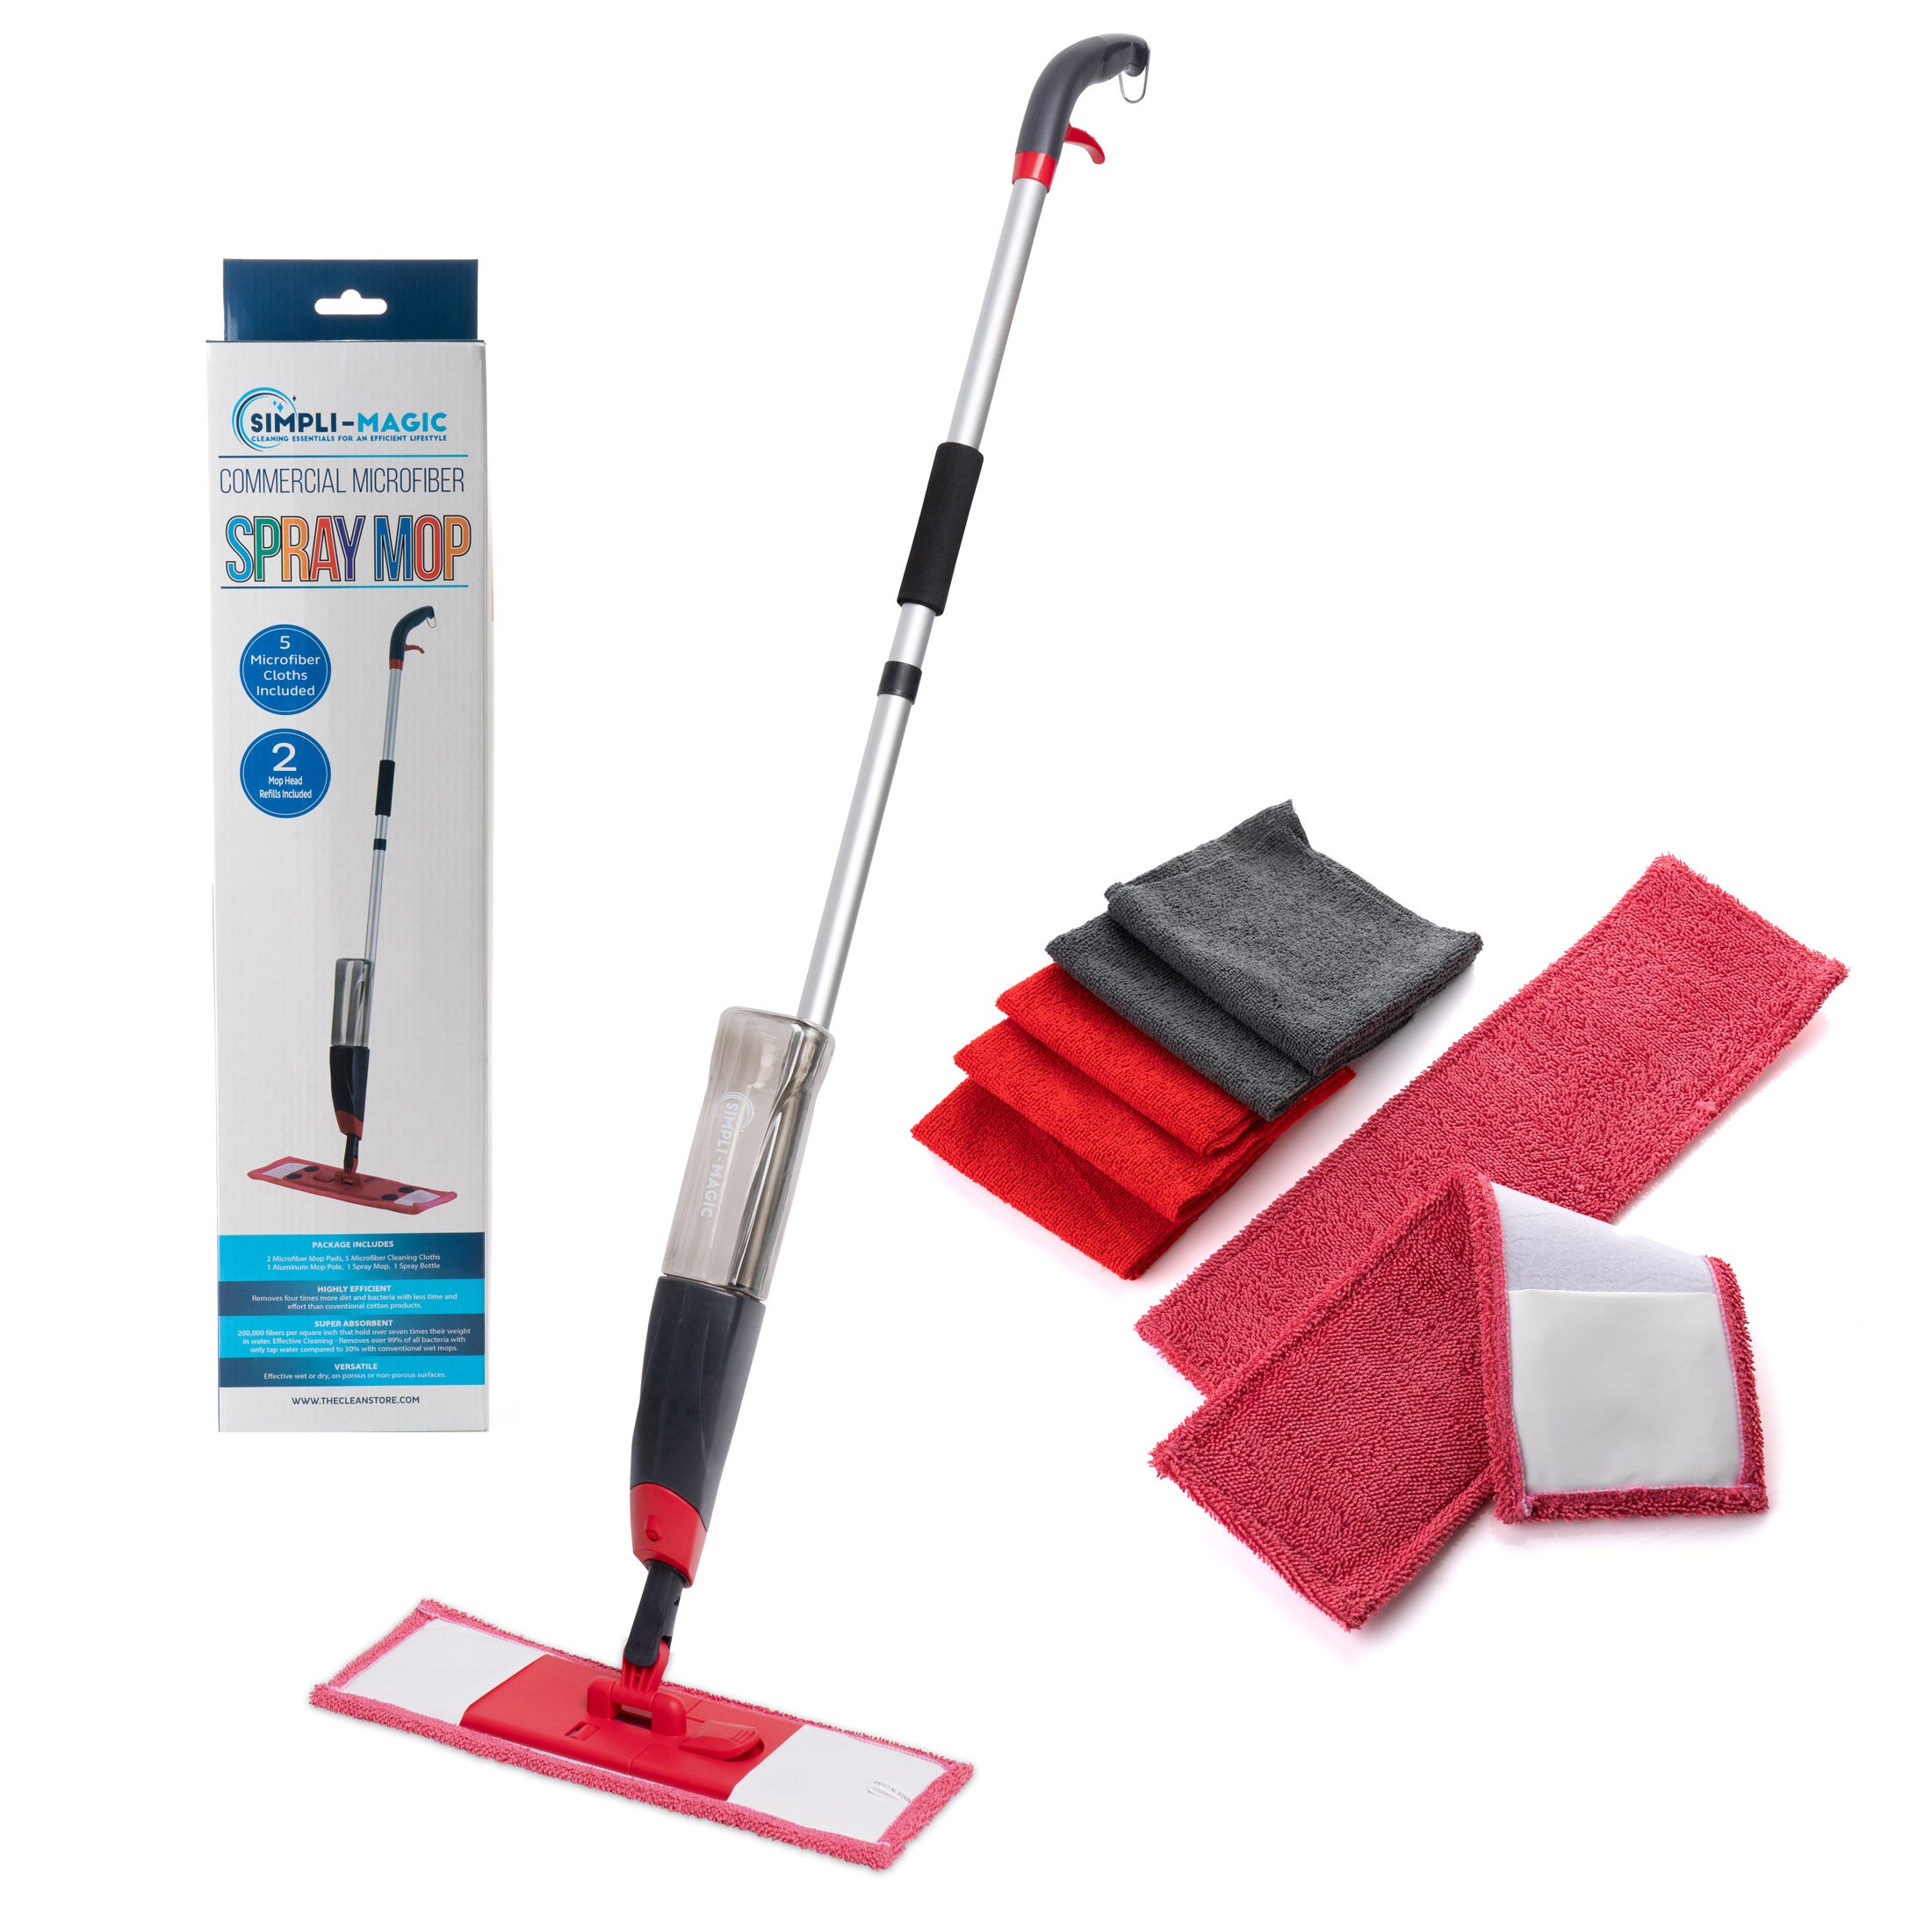 Spray Mop – The Clean Store